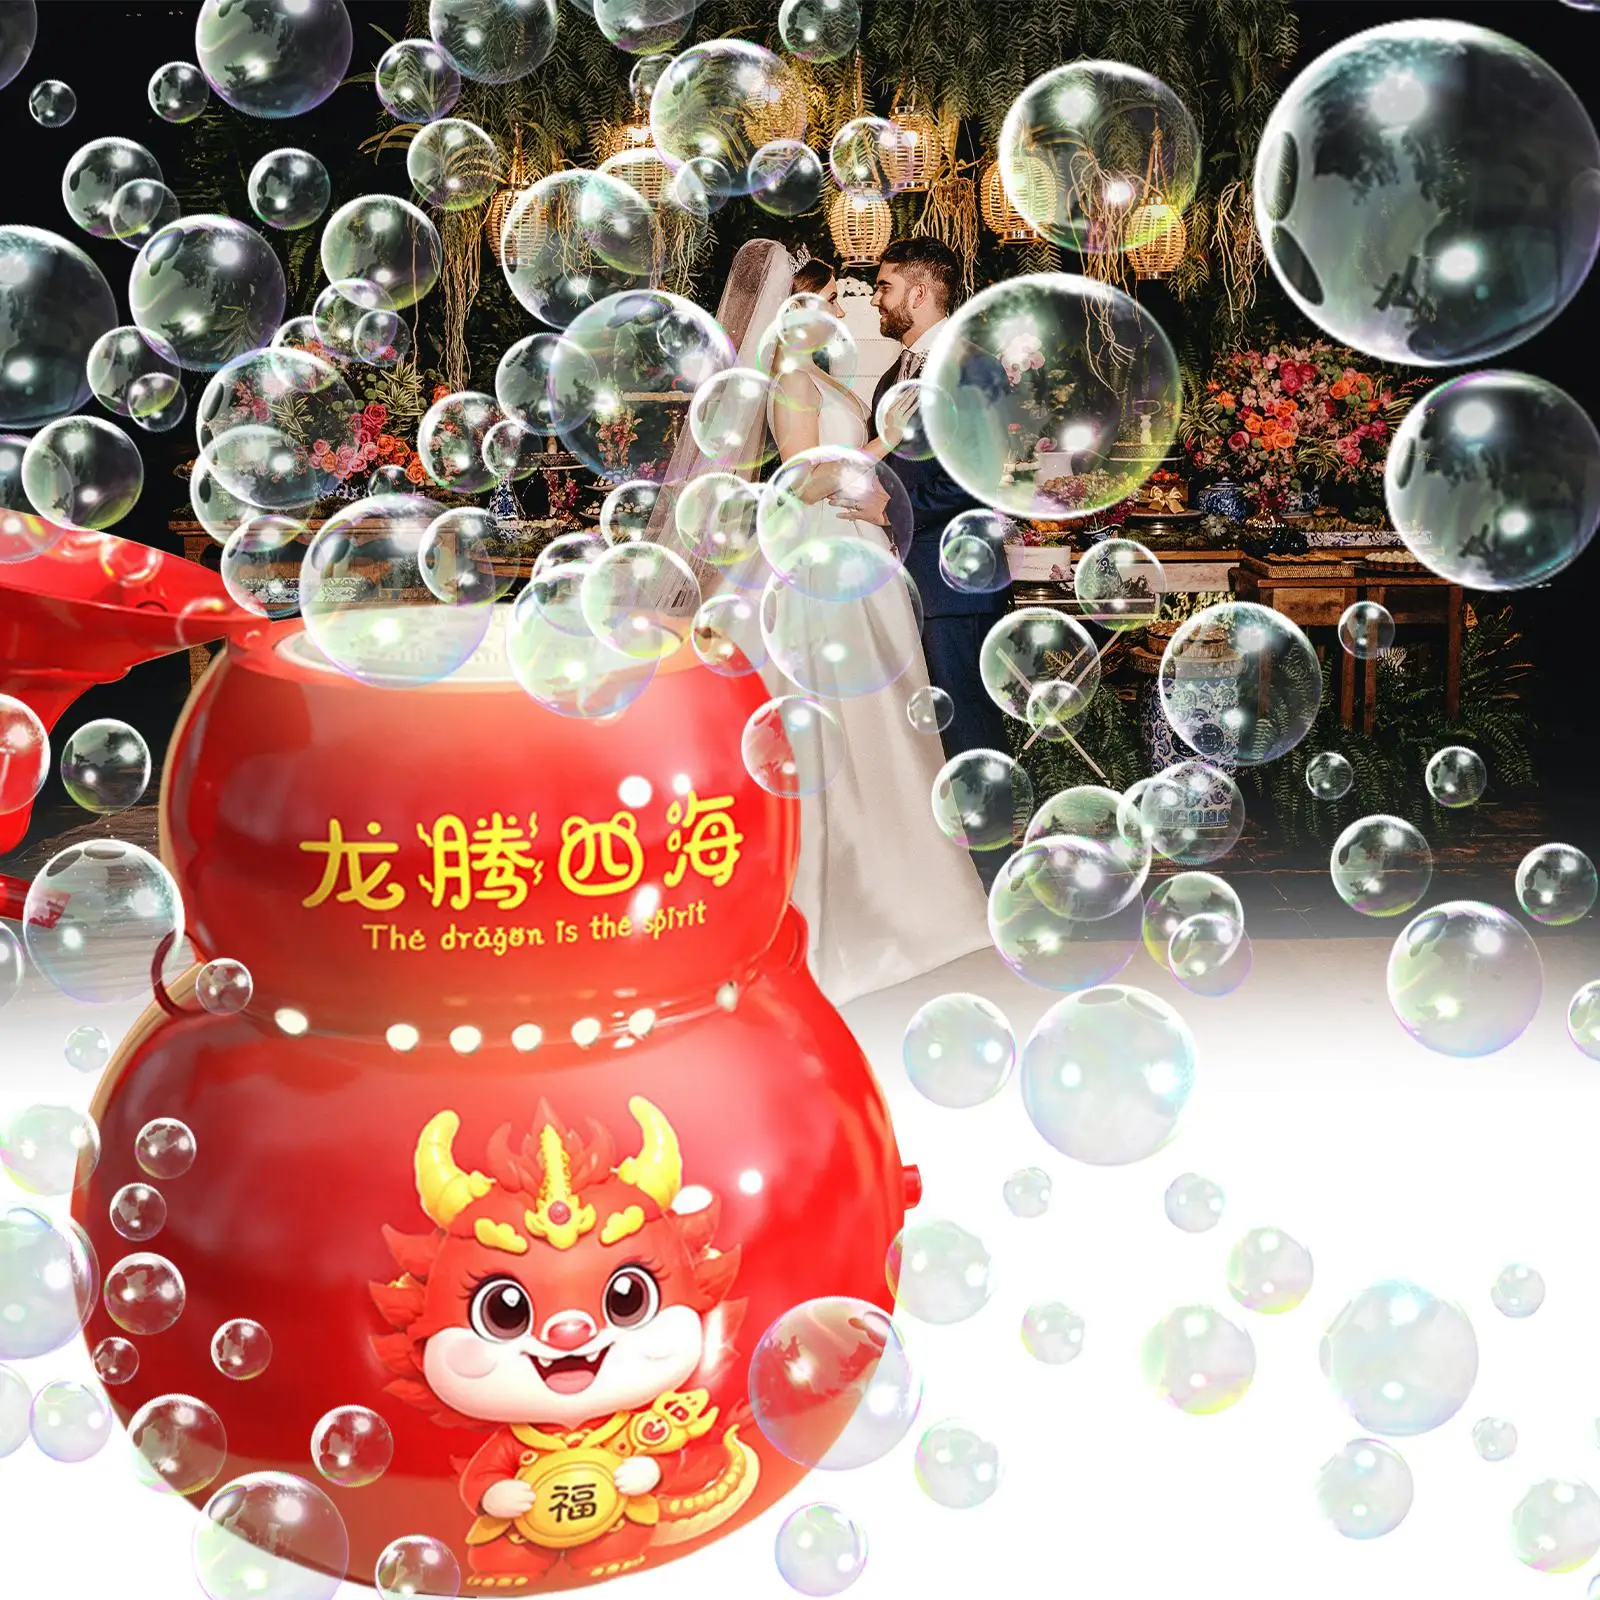 Fireworks Bubble Machine Automatic Beach Toy Big Bubble with Sounds Chinese New Year for New Year Party Indoor Garden Lawn